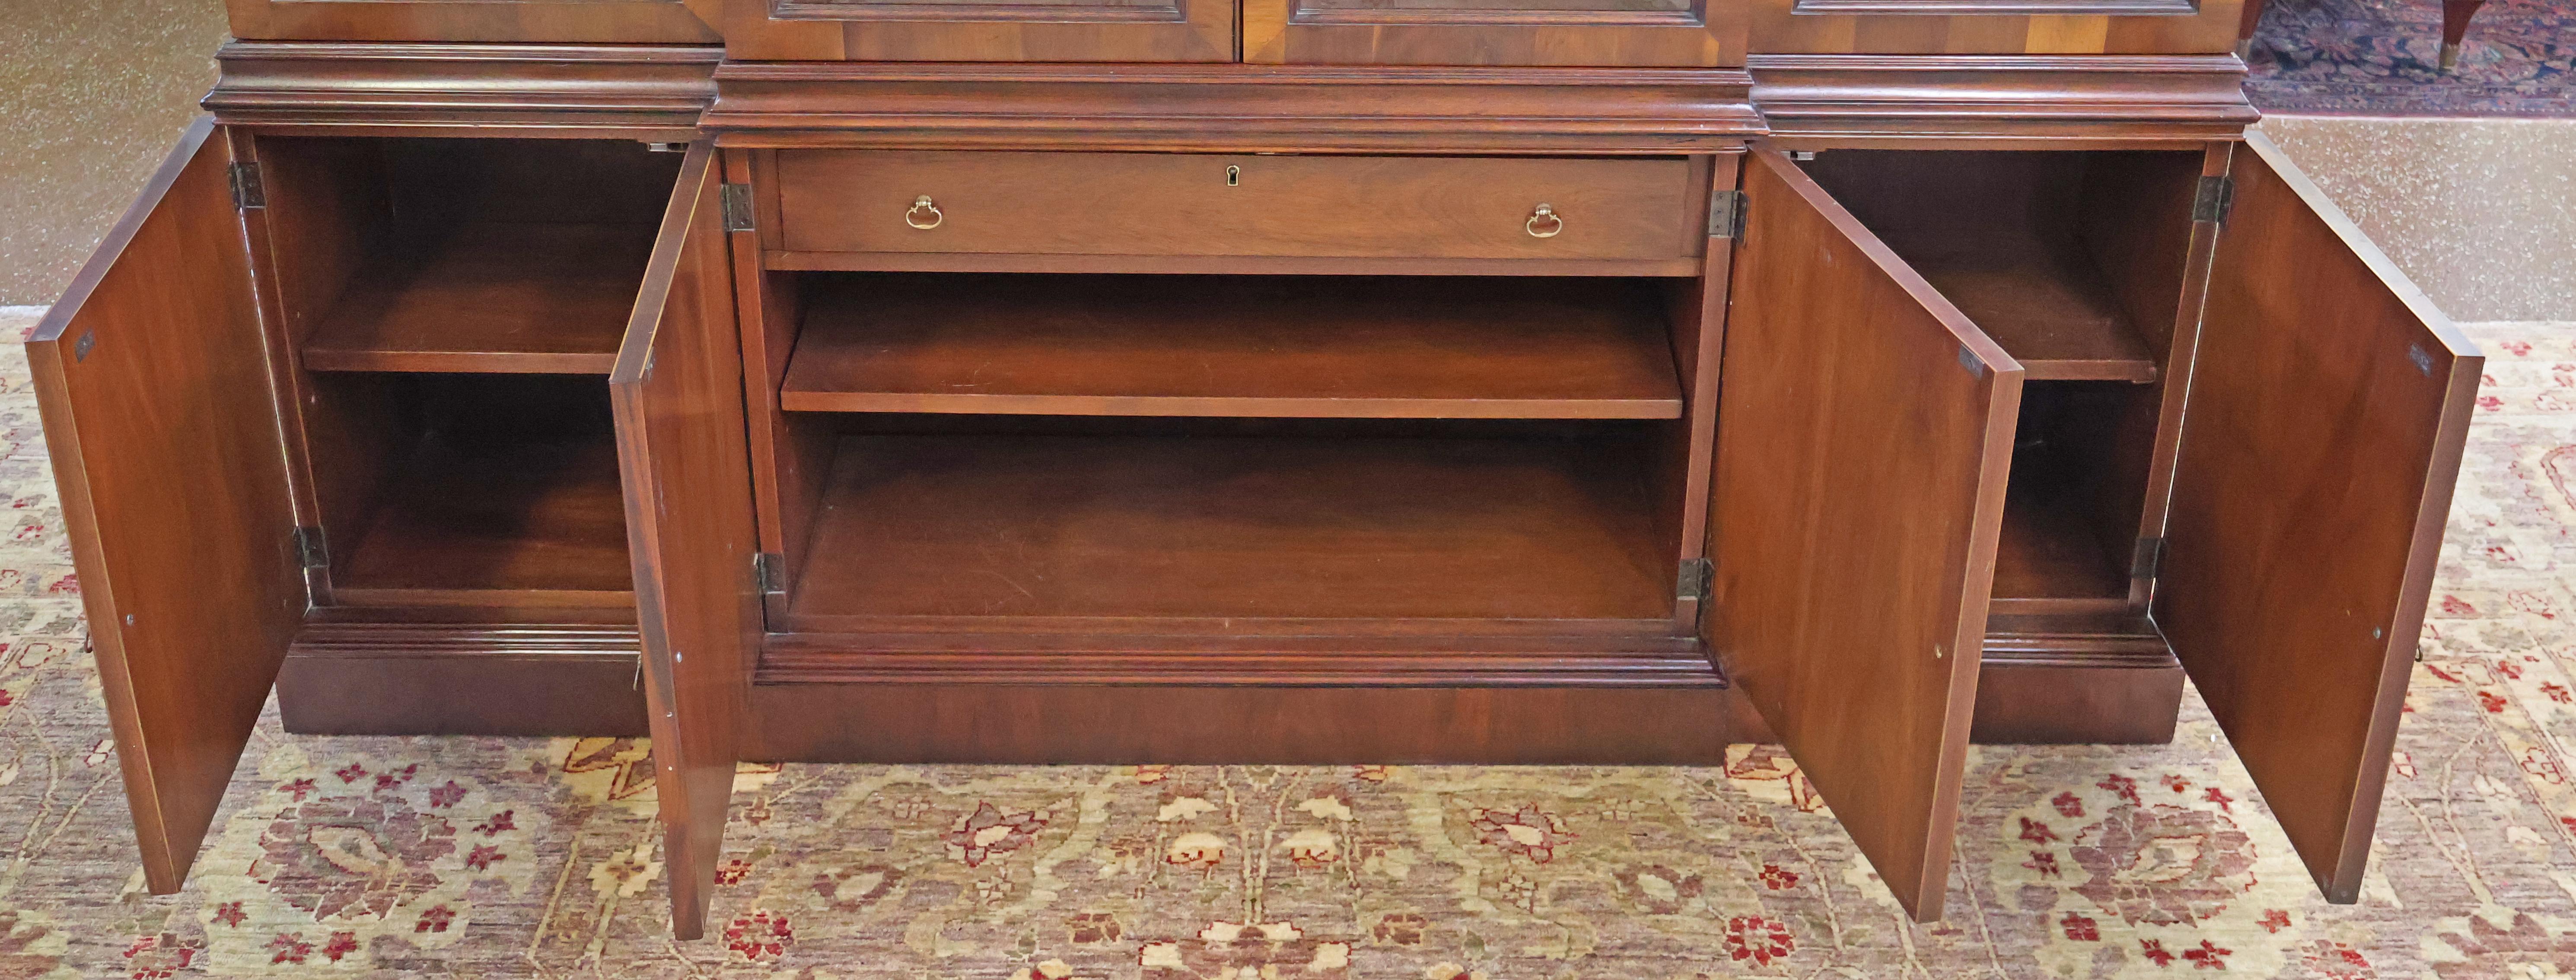 Hekman Federal Style Mahogany Bookcase Cabinet Breakfront For Sale 6